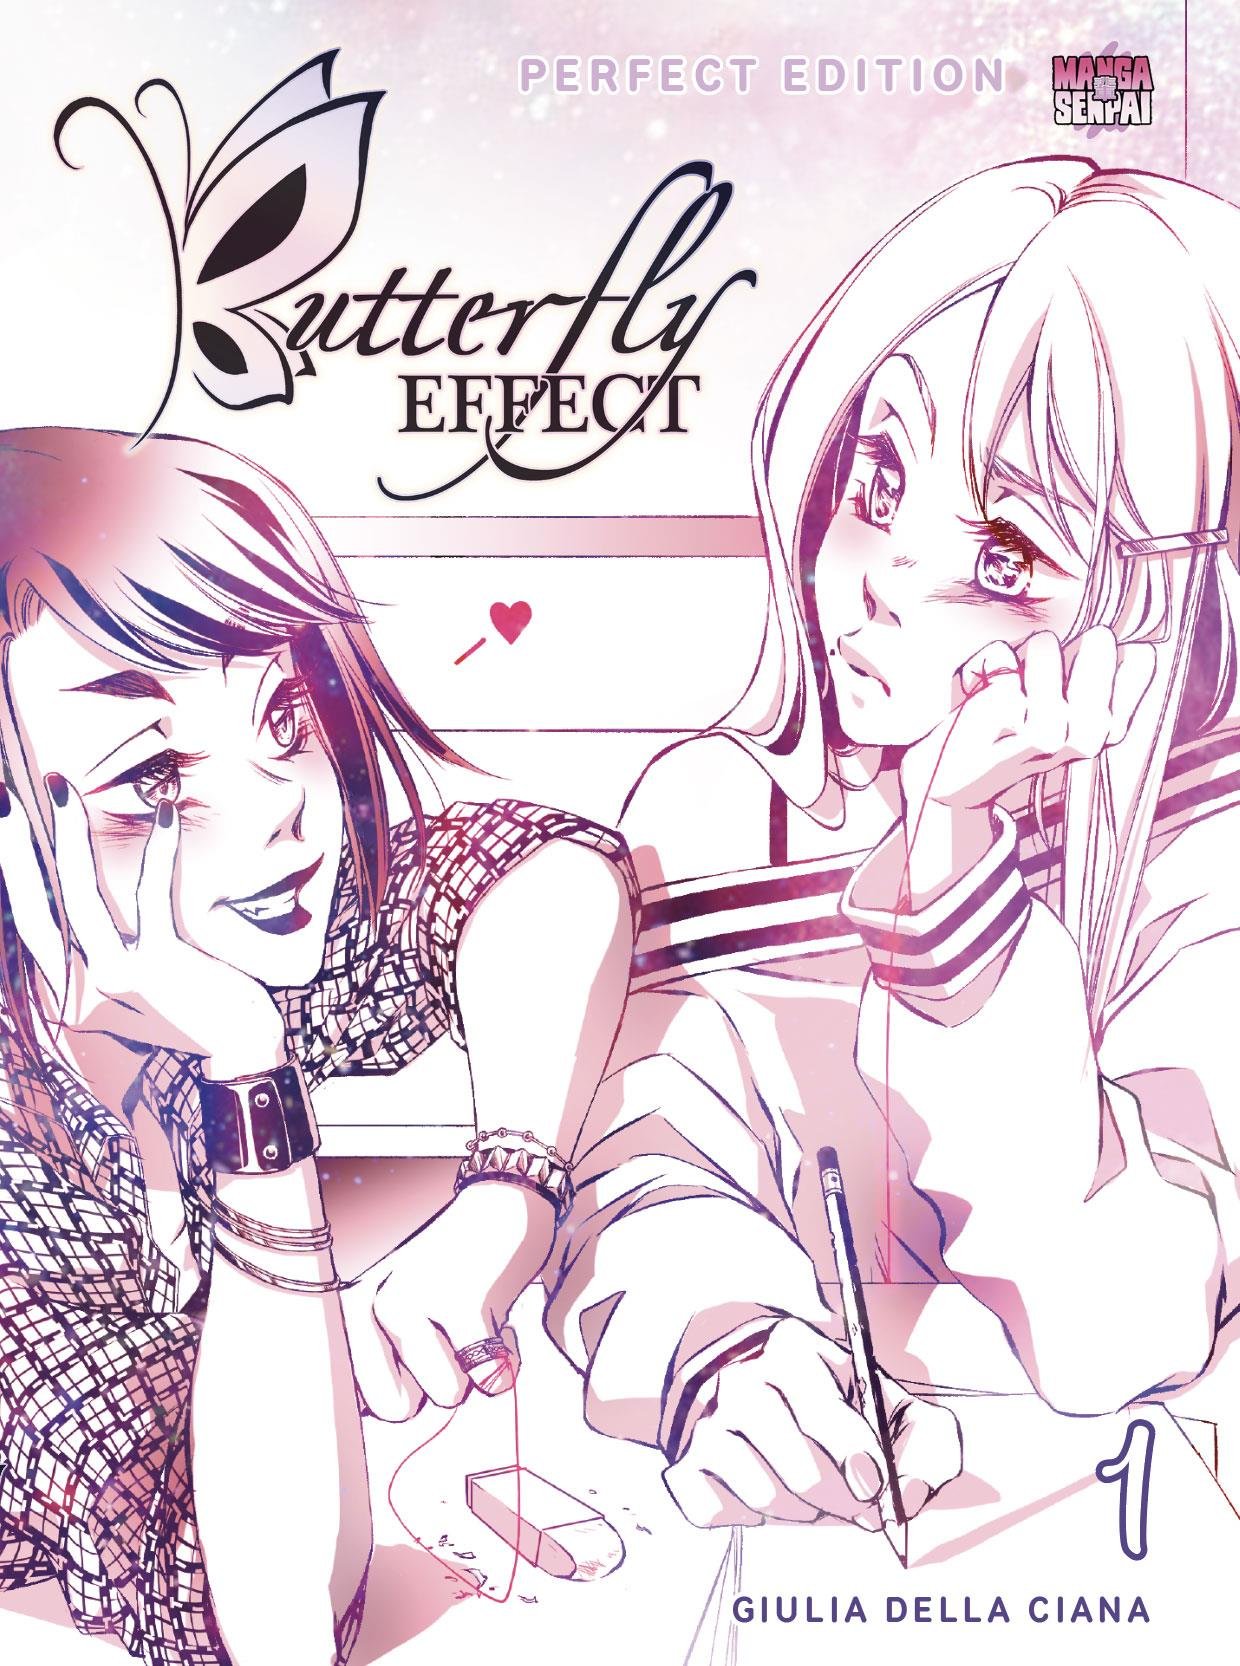 BUTTERFLY EFFECT PERFECT EDITION 1 VARIANT